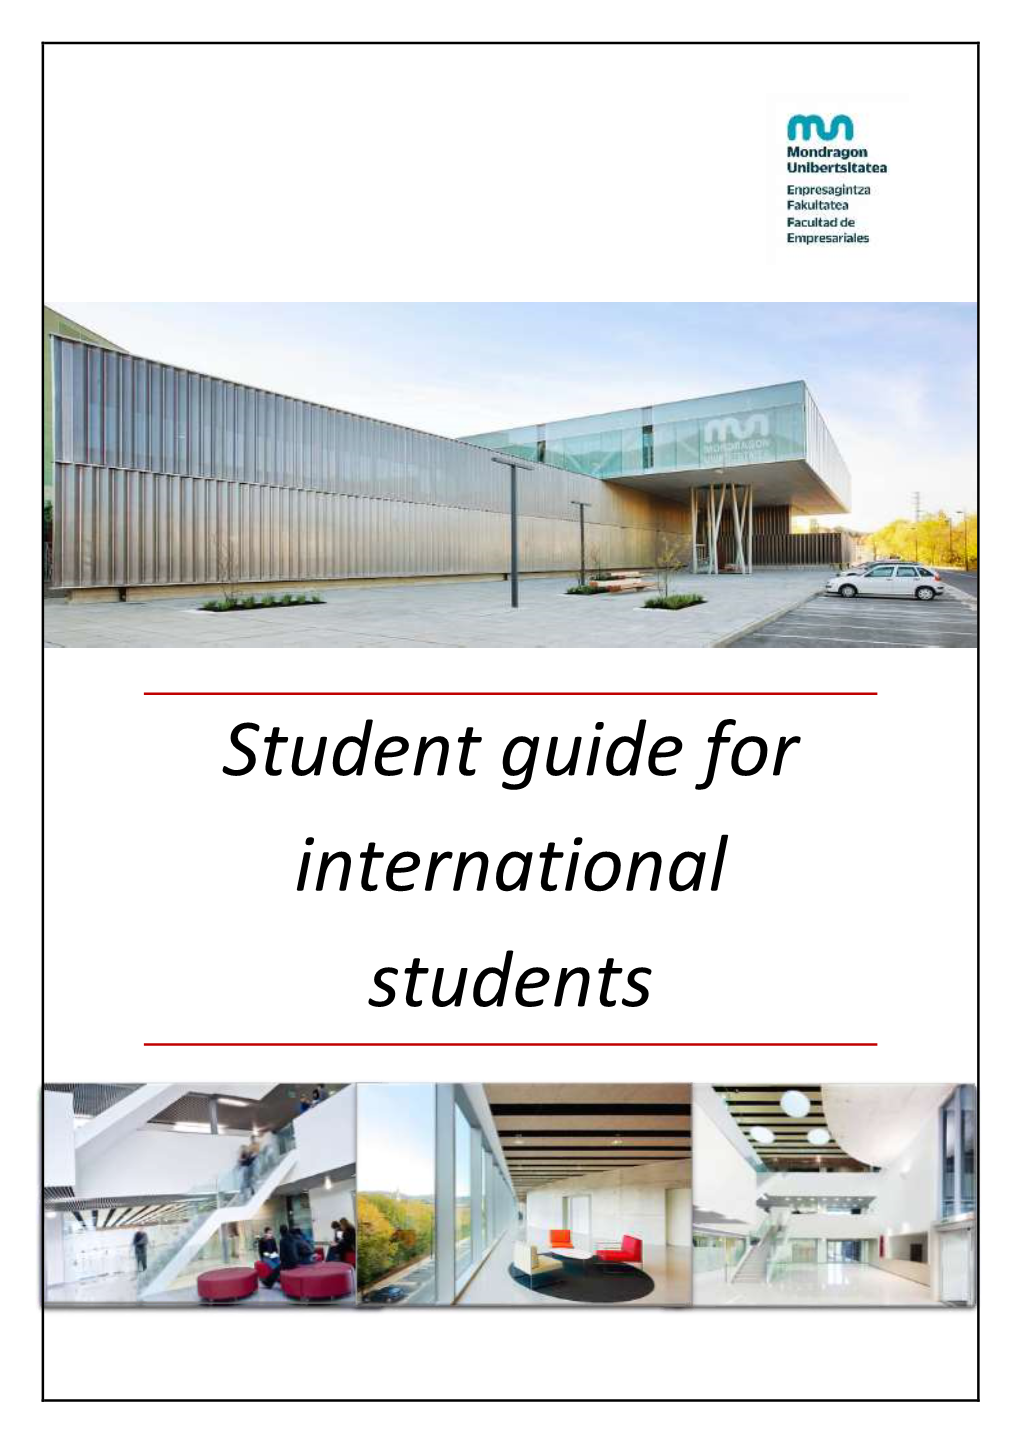 Student Guide for International Students